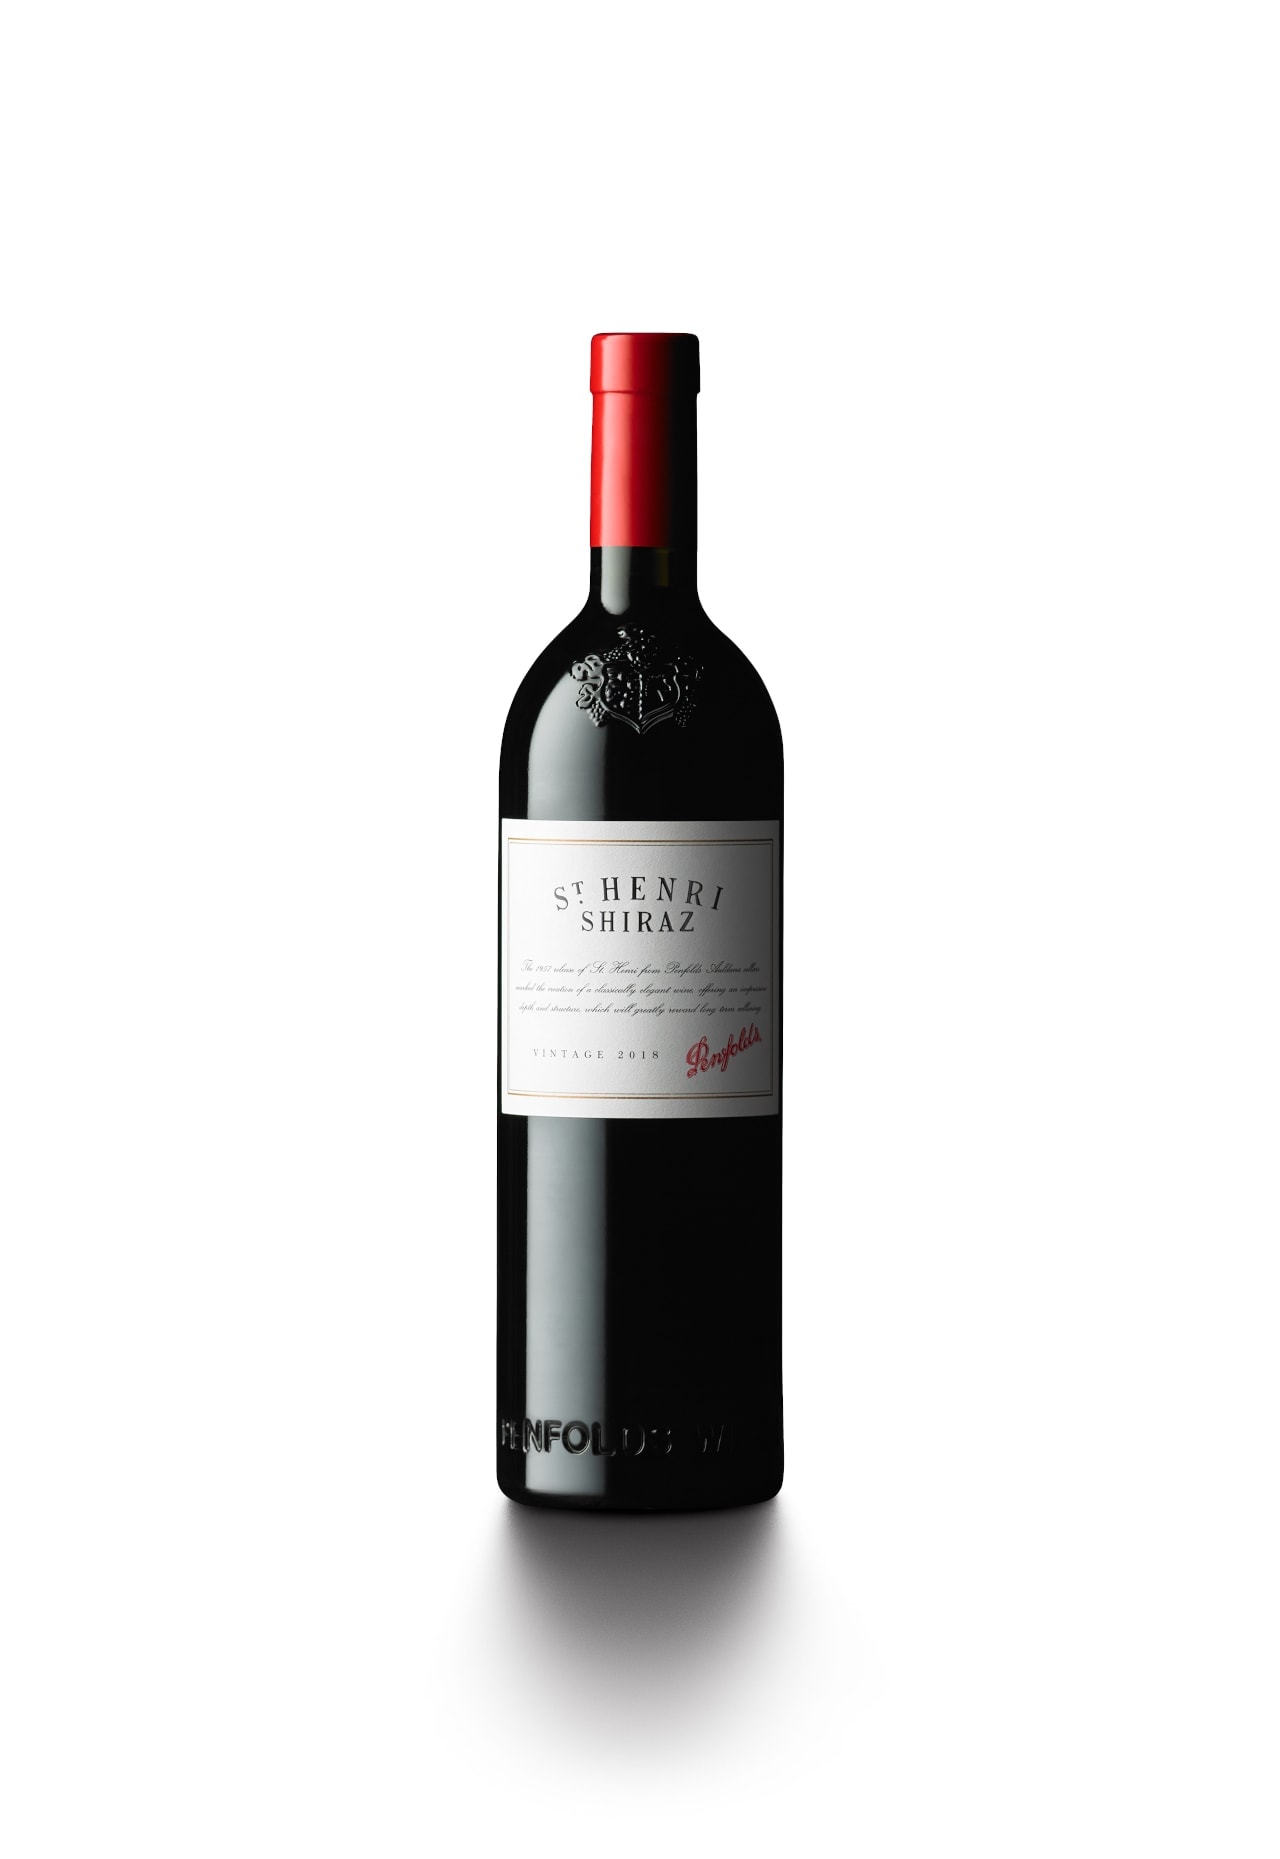 Penfolds St Henri Shiraz 2018 Cork 135 22St Henri Is Rich And Plush When Young Gaining Soft Earthy Mocha Like Characters With Age. It Is Matured In An Assortment Of Old Large Vats.22